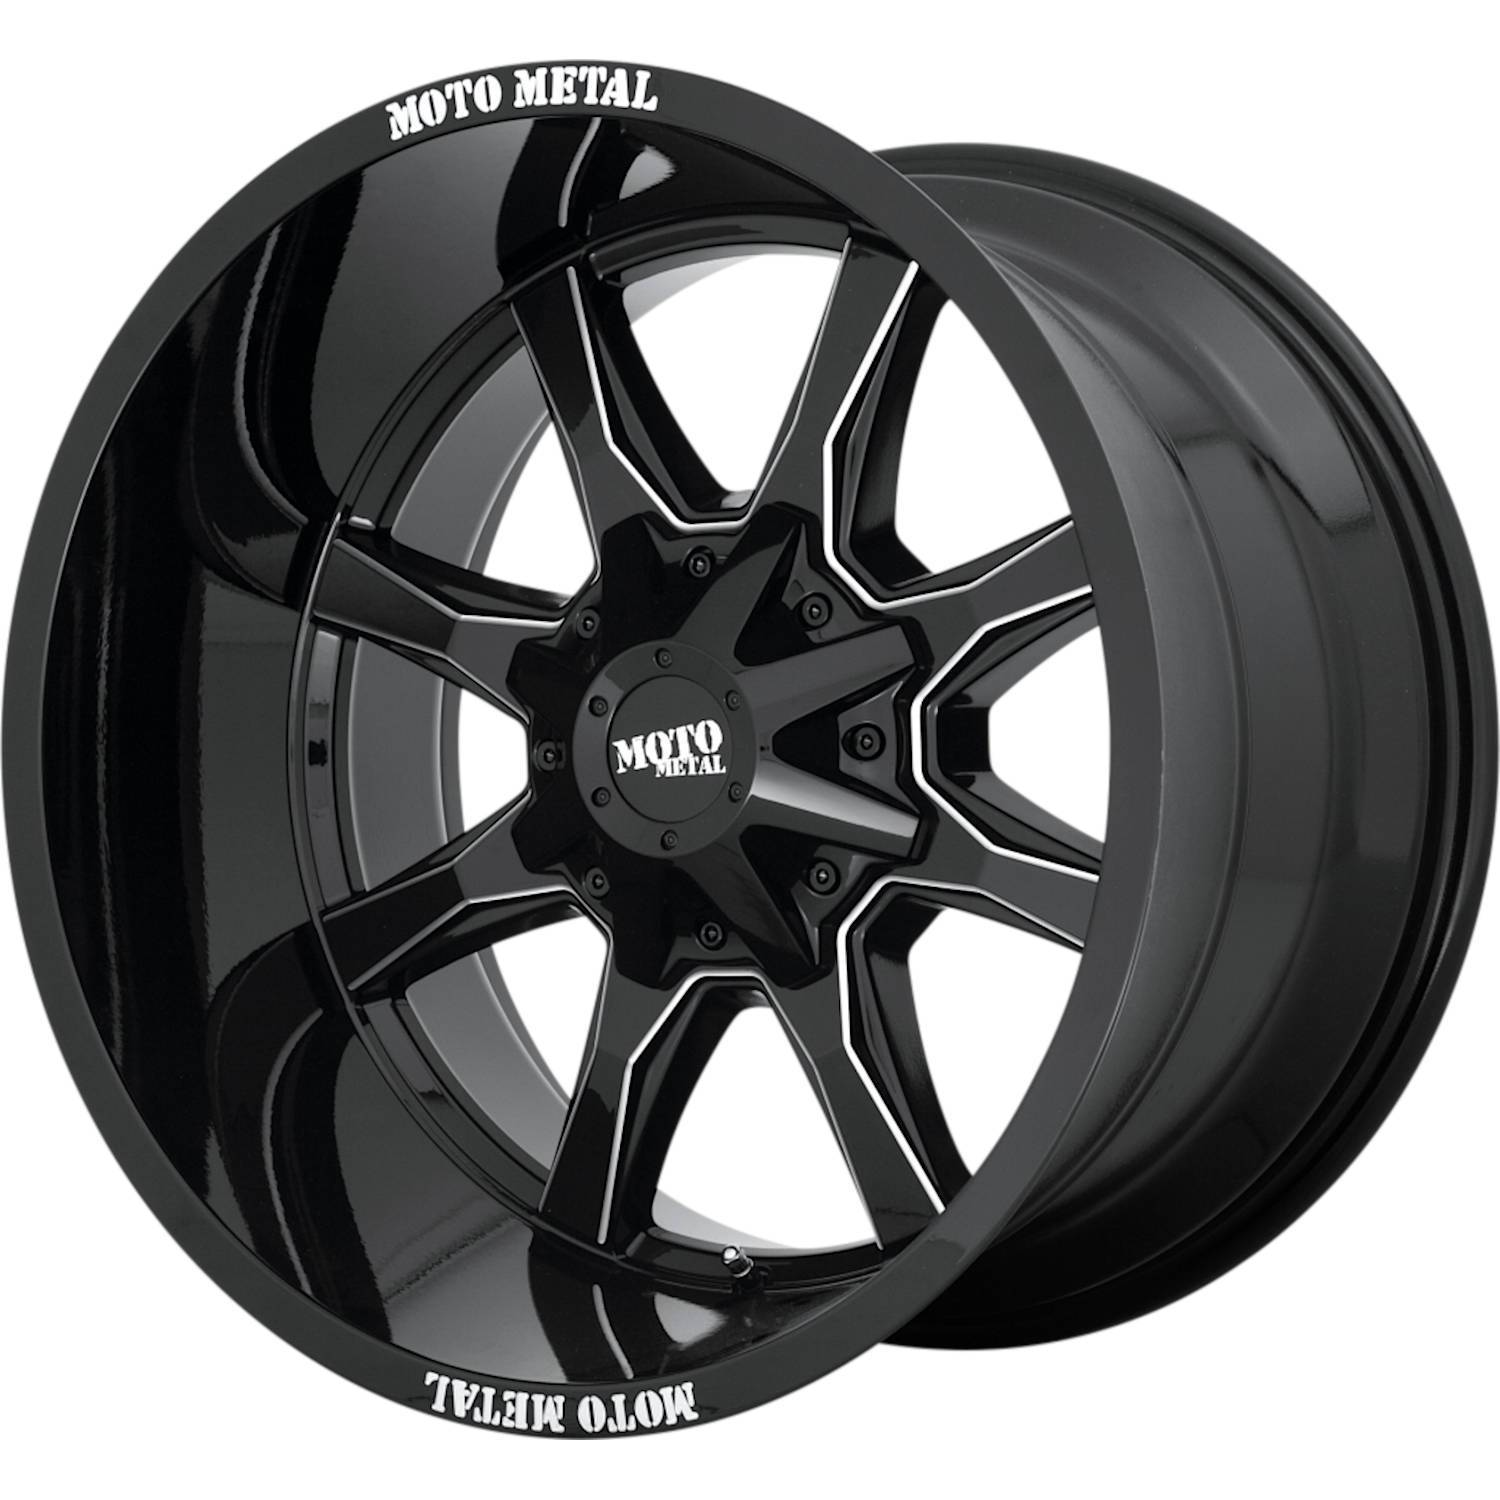 Moto Metal MO970 20x9 18 5x139.7 (5x5.5)/5x150 Gloss Black with Milled Spoke Edges - Tires and Engine Performance